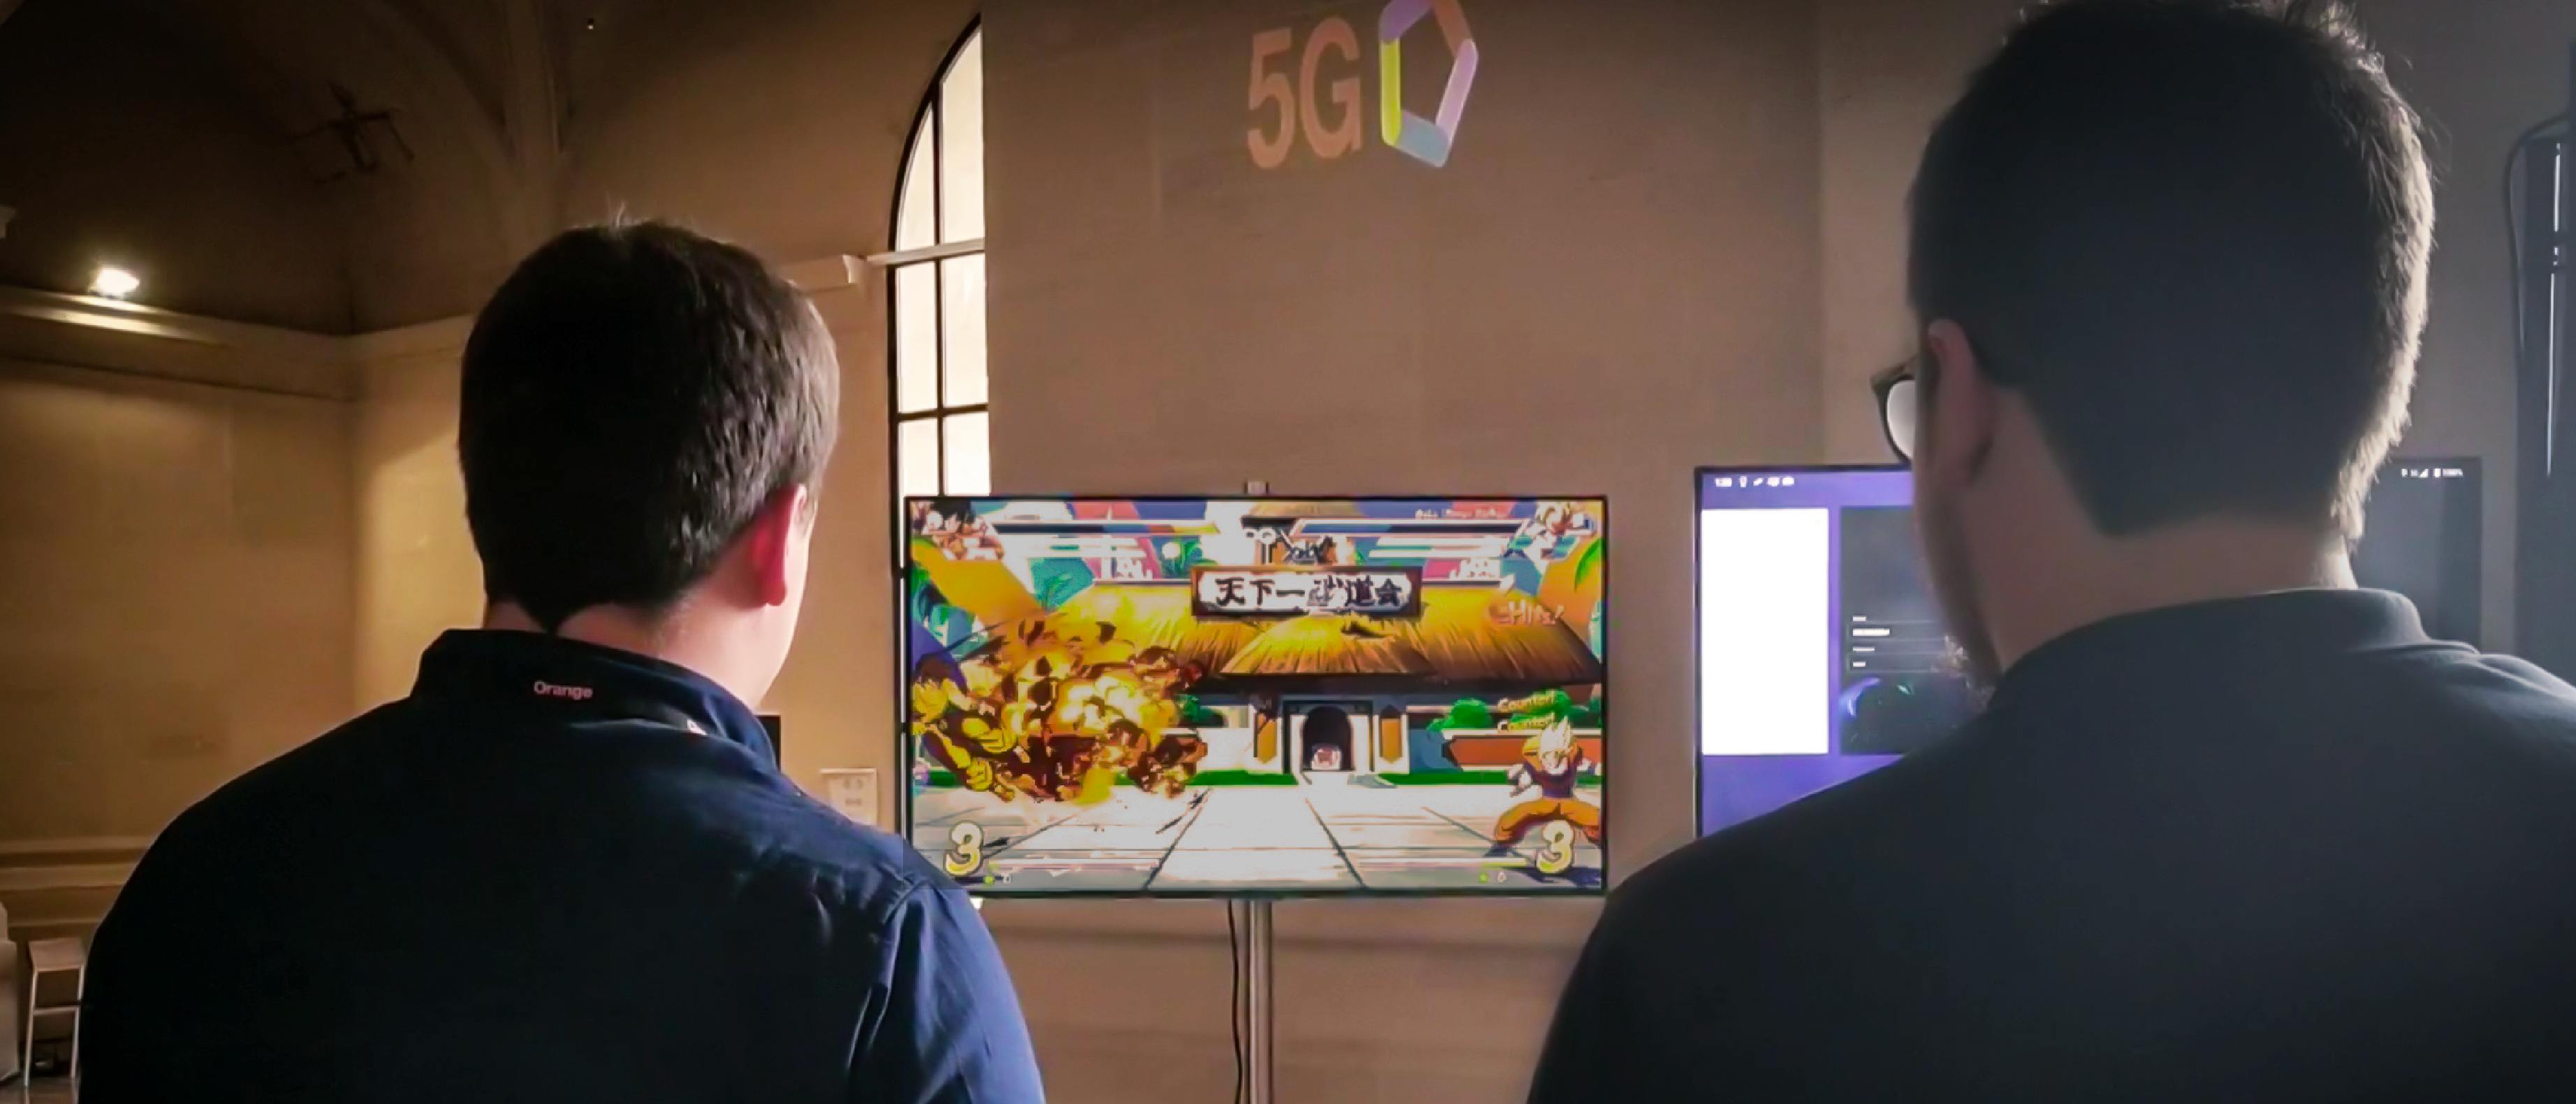 Playing Dragon Ball Fighterz on Shadow at the Show Hello 5G event in Lille. 